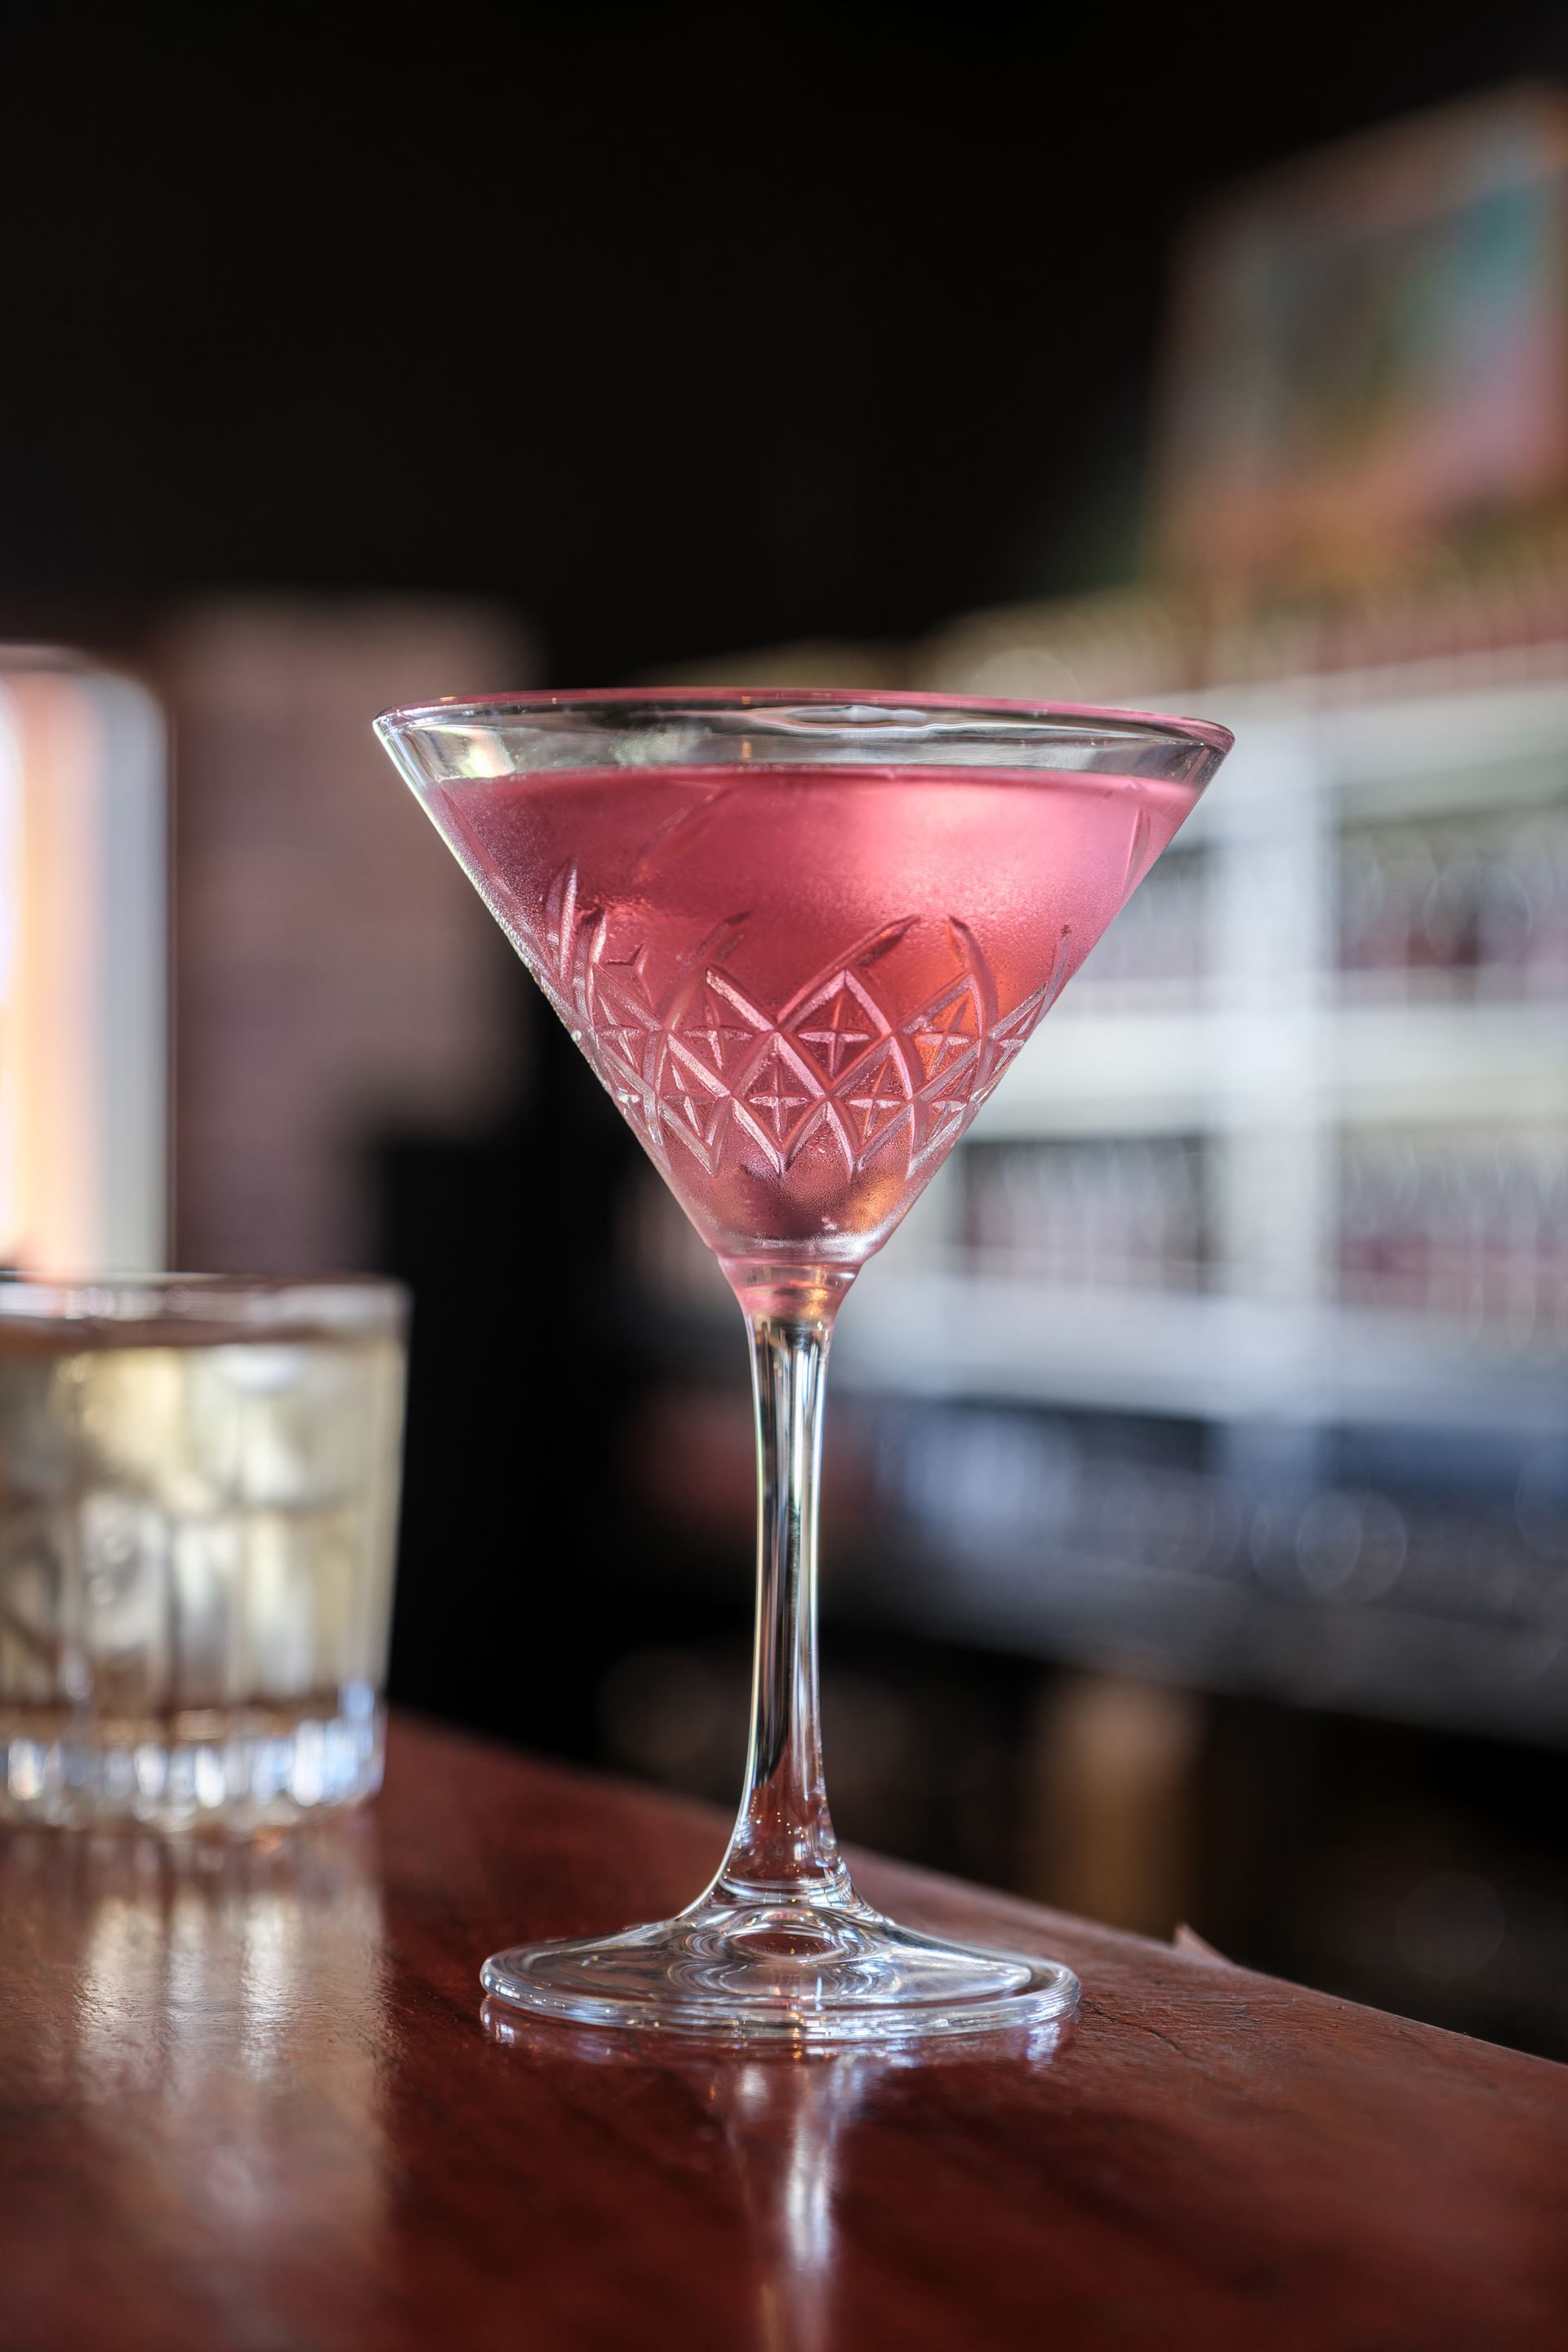 a martini glass filled with a pink liquid is sitting on a bar .